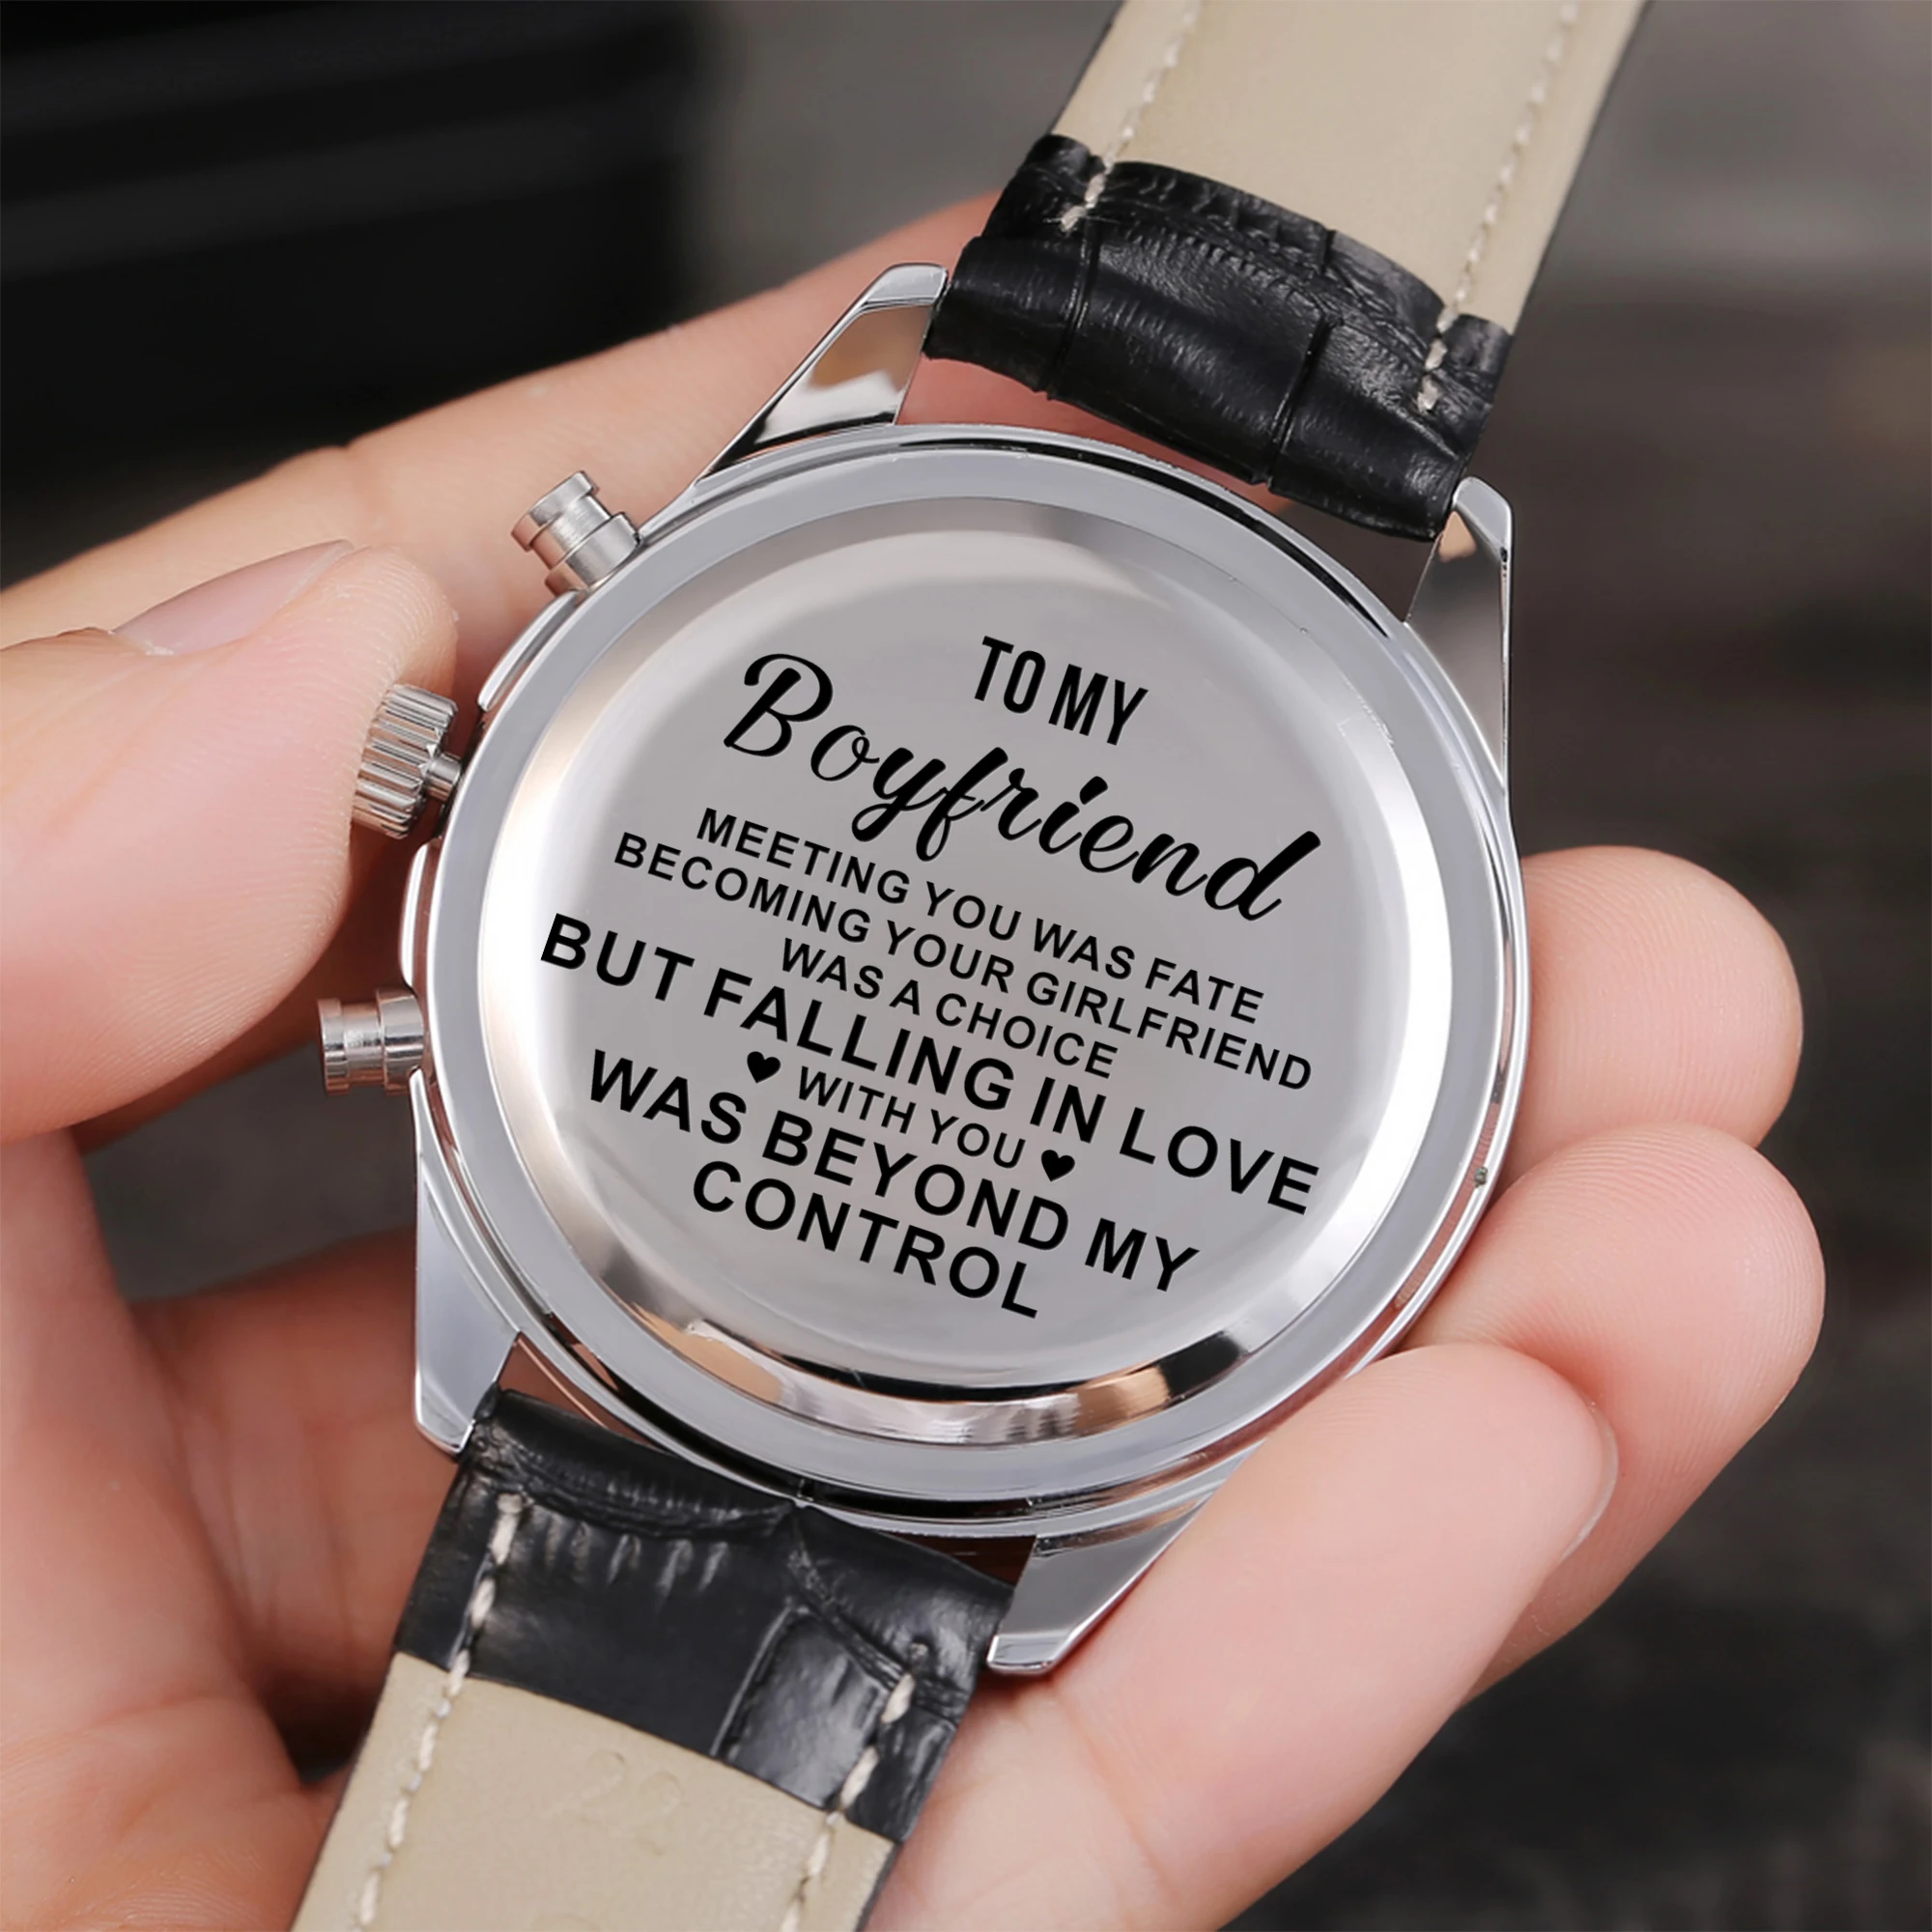 

"TO MY BOYFRIEND-ENGRAVED WATCH MANY MILES SEPARATE US BUT IT WILL NEVER ENOUGH TO STOP ME FROM LOVING YOU "